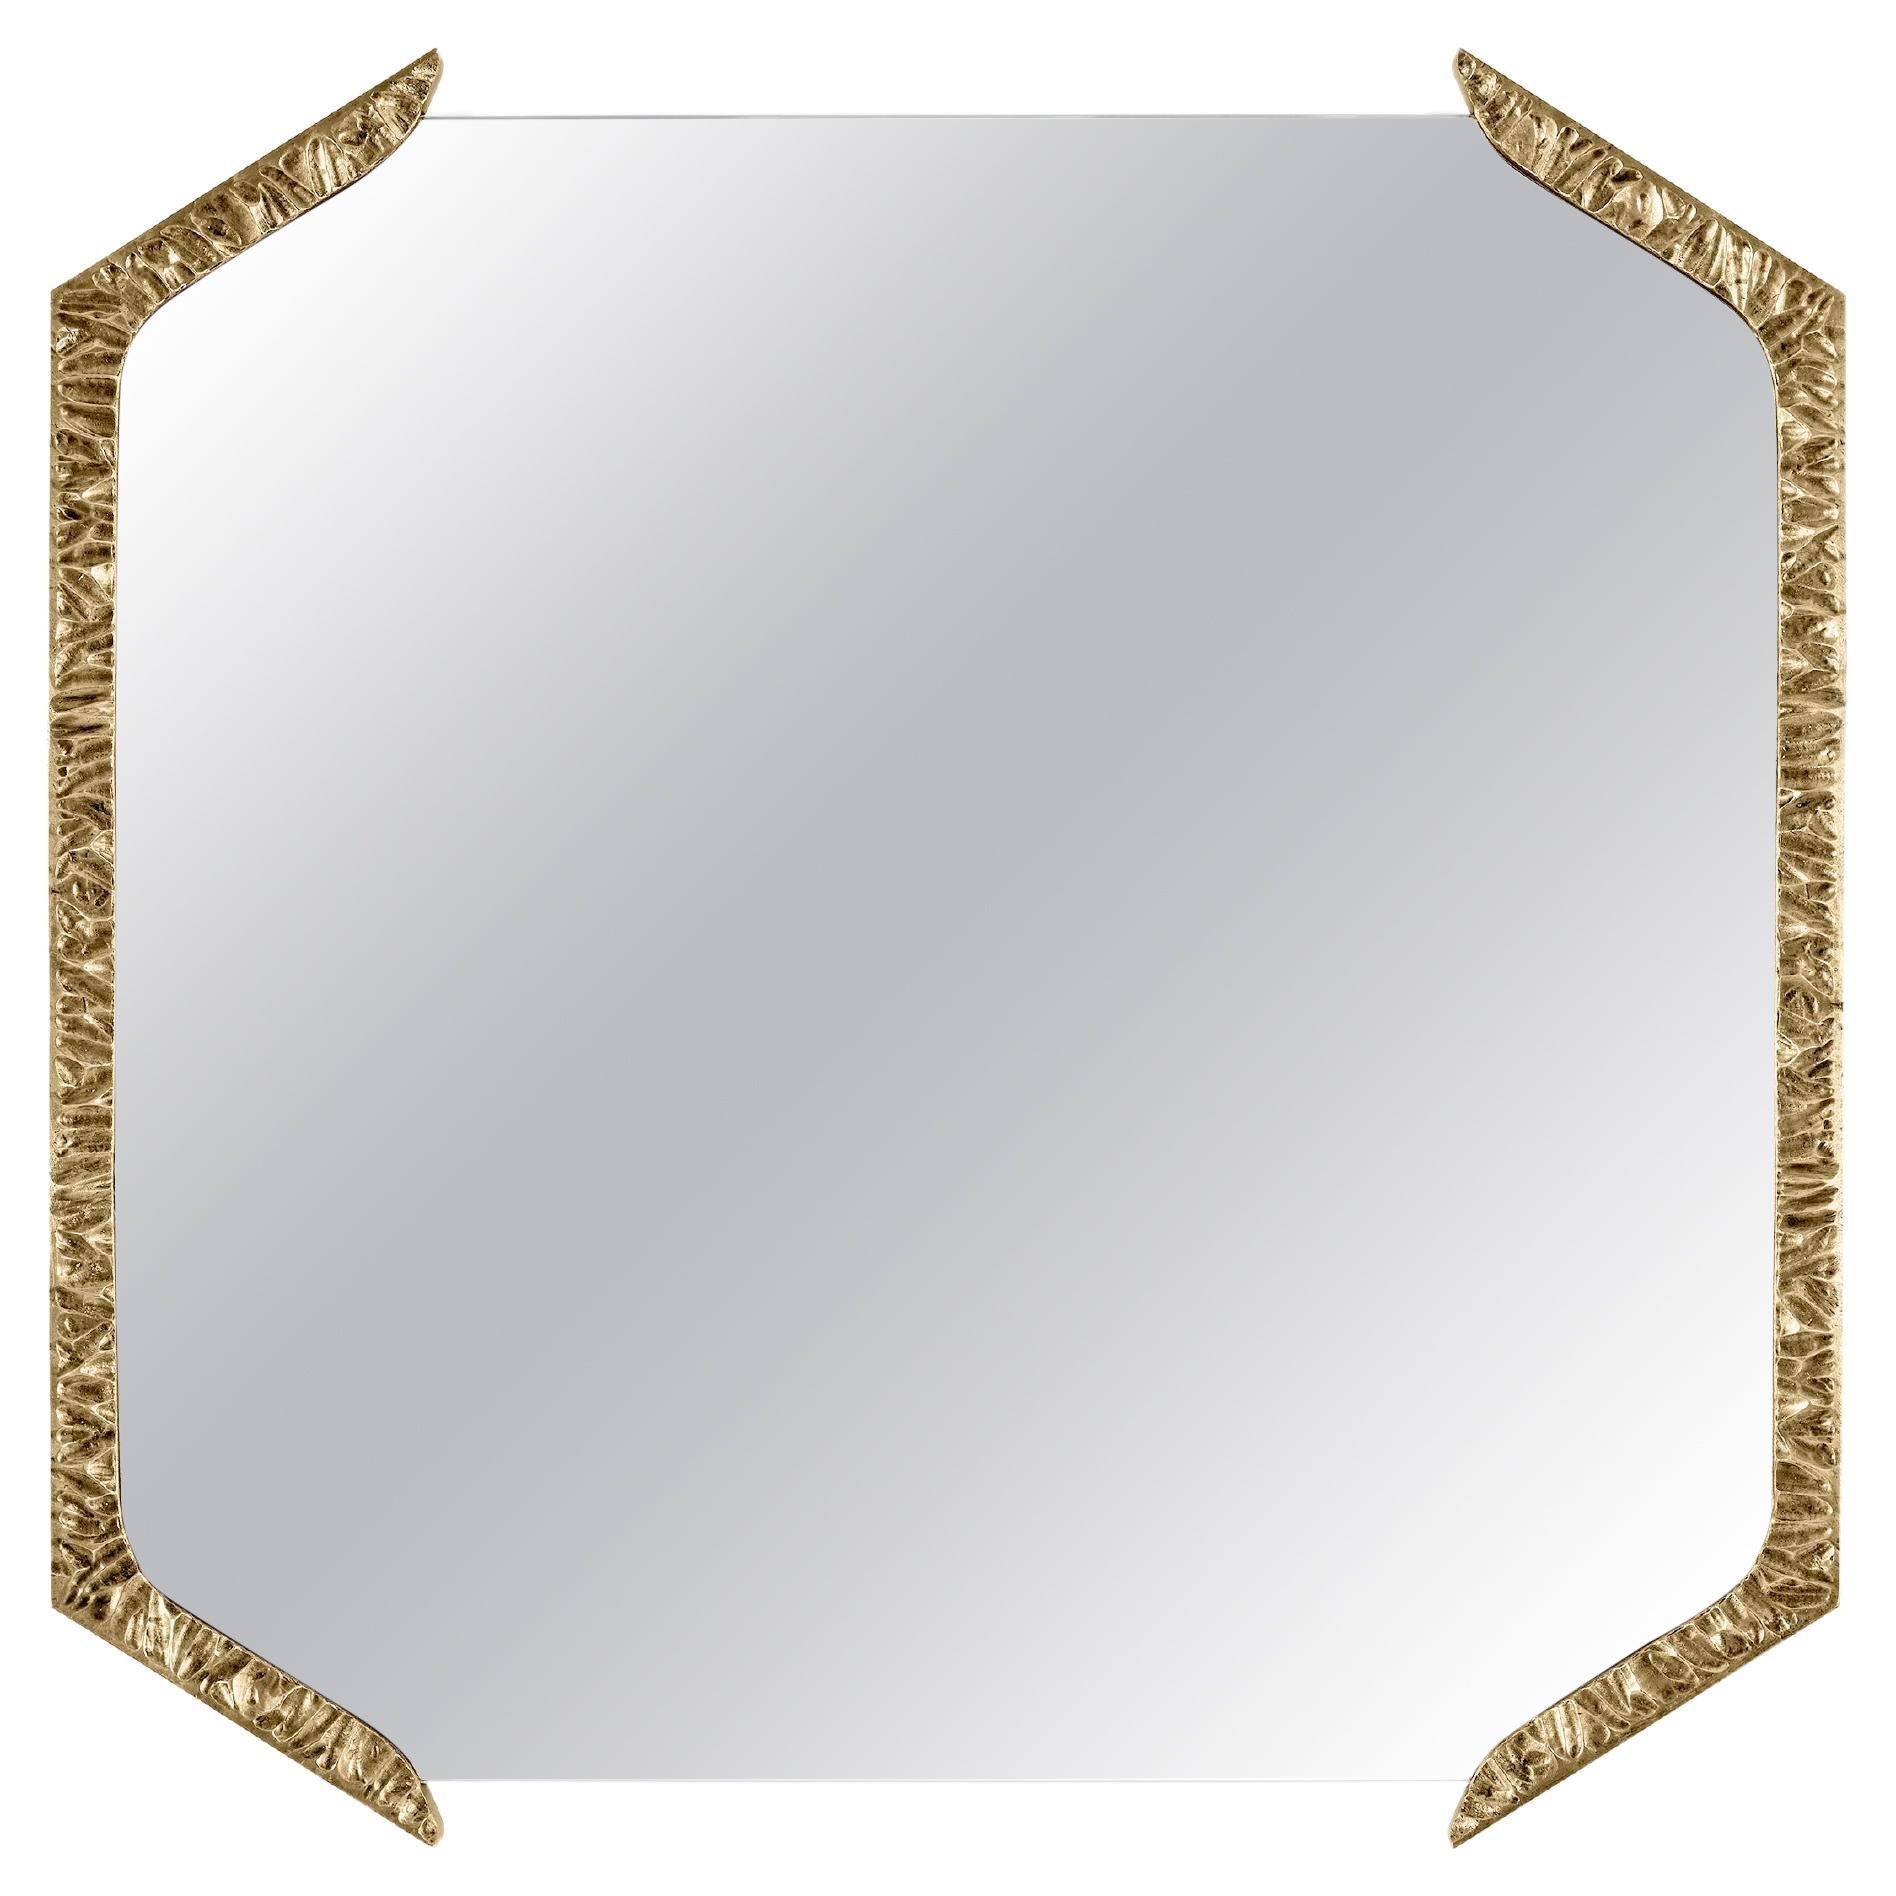 Alentejo Brass Square Mirror by InsidherLand For Sale